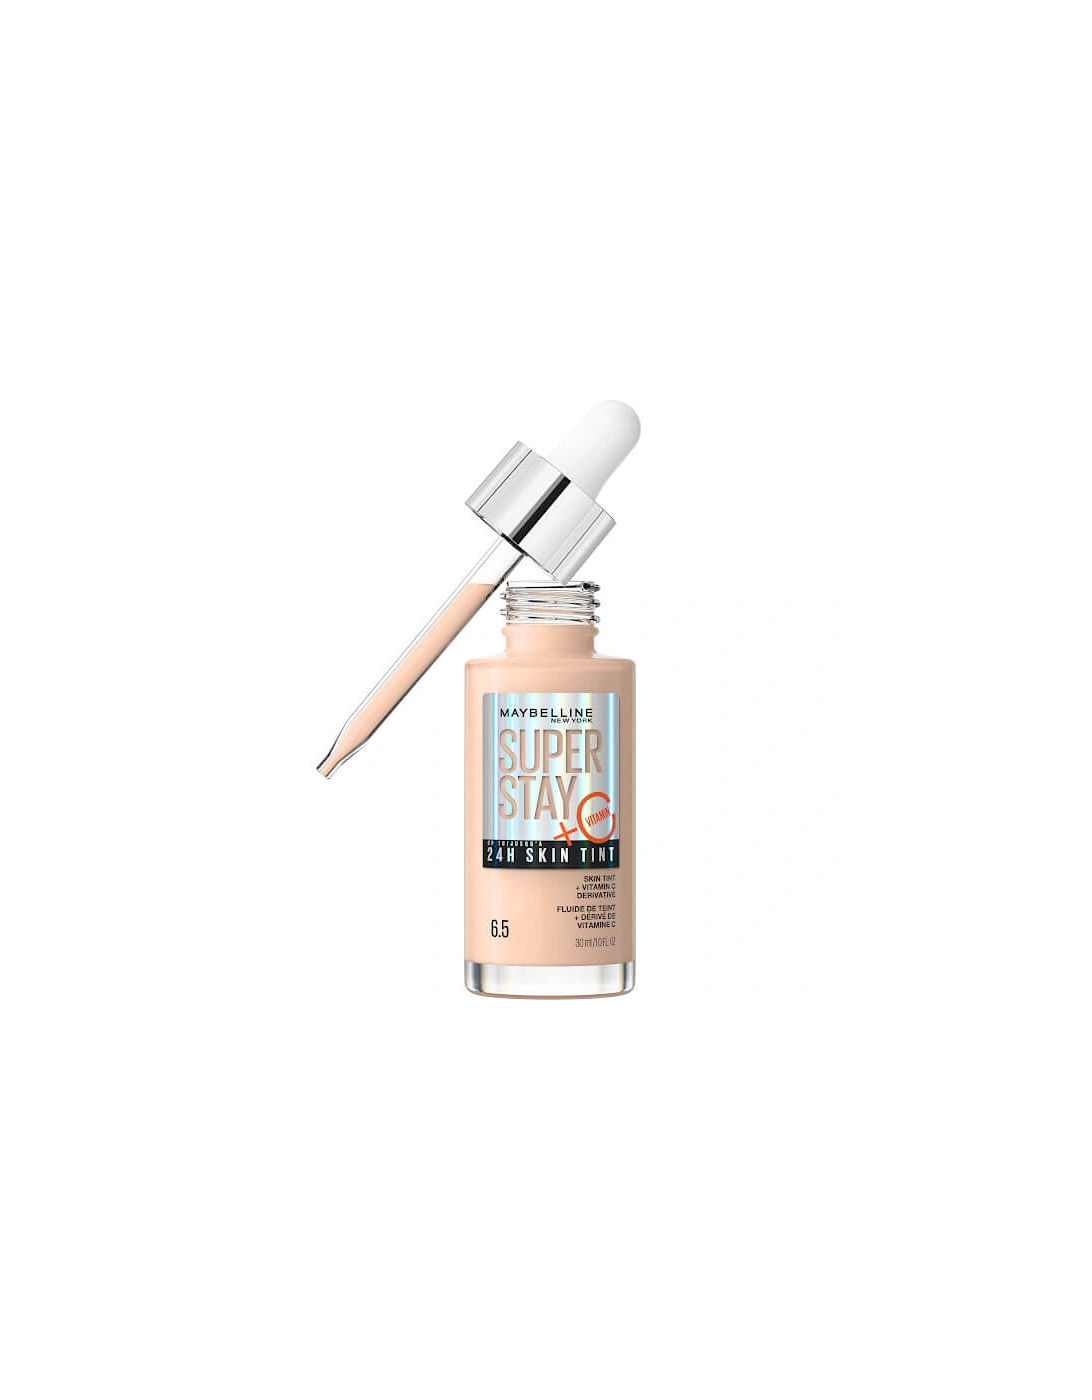 Super Stay up to 24H Skin Tint Foundation + Vitamin C - Shade 06.5, 2 of 1